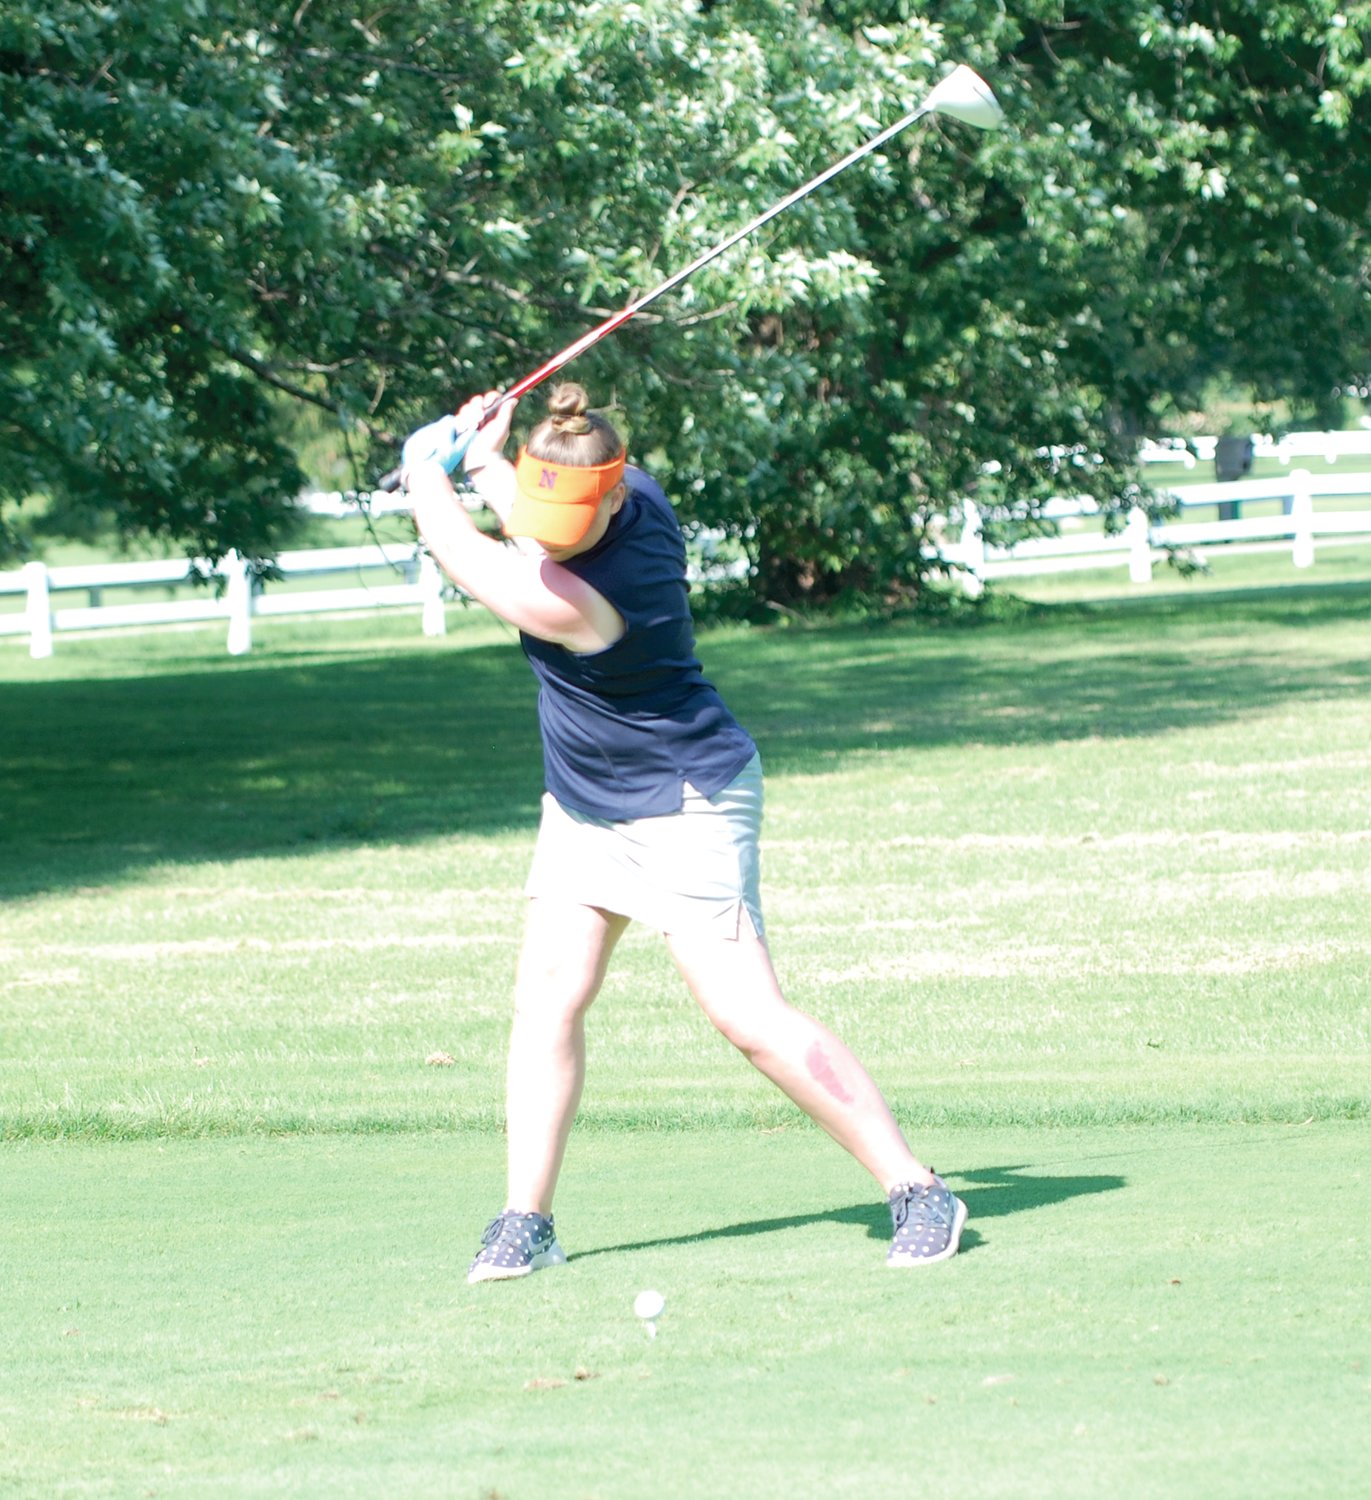 North Montgomery's Morgan Swick tees off on No. 10 at the Crawfordsville Country Club on Saturday afternoong. Swick led the Chargers with a 106 at the Southmont Invitational.